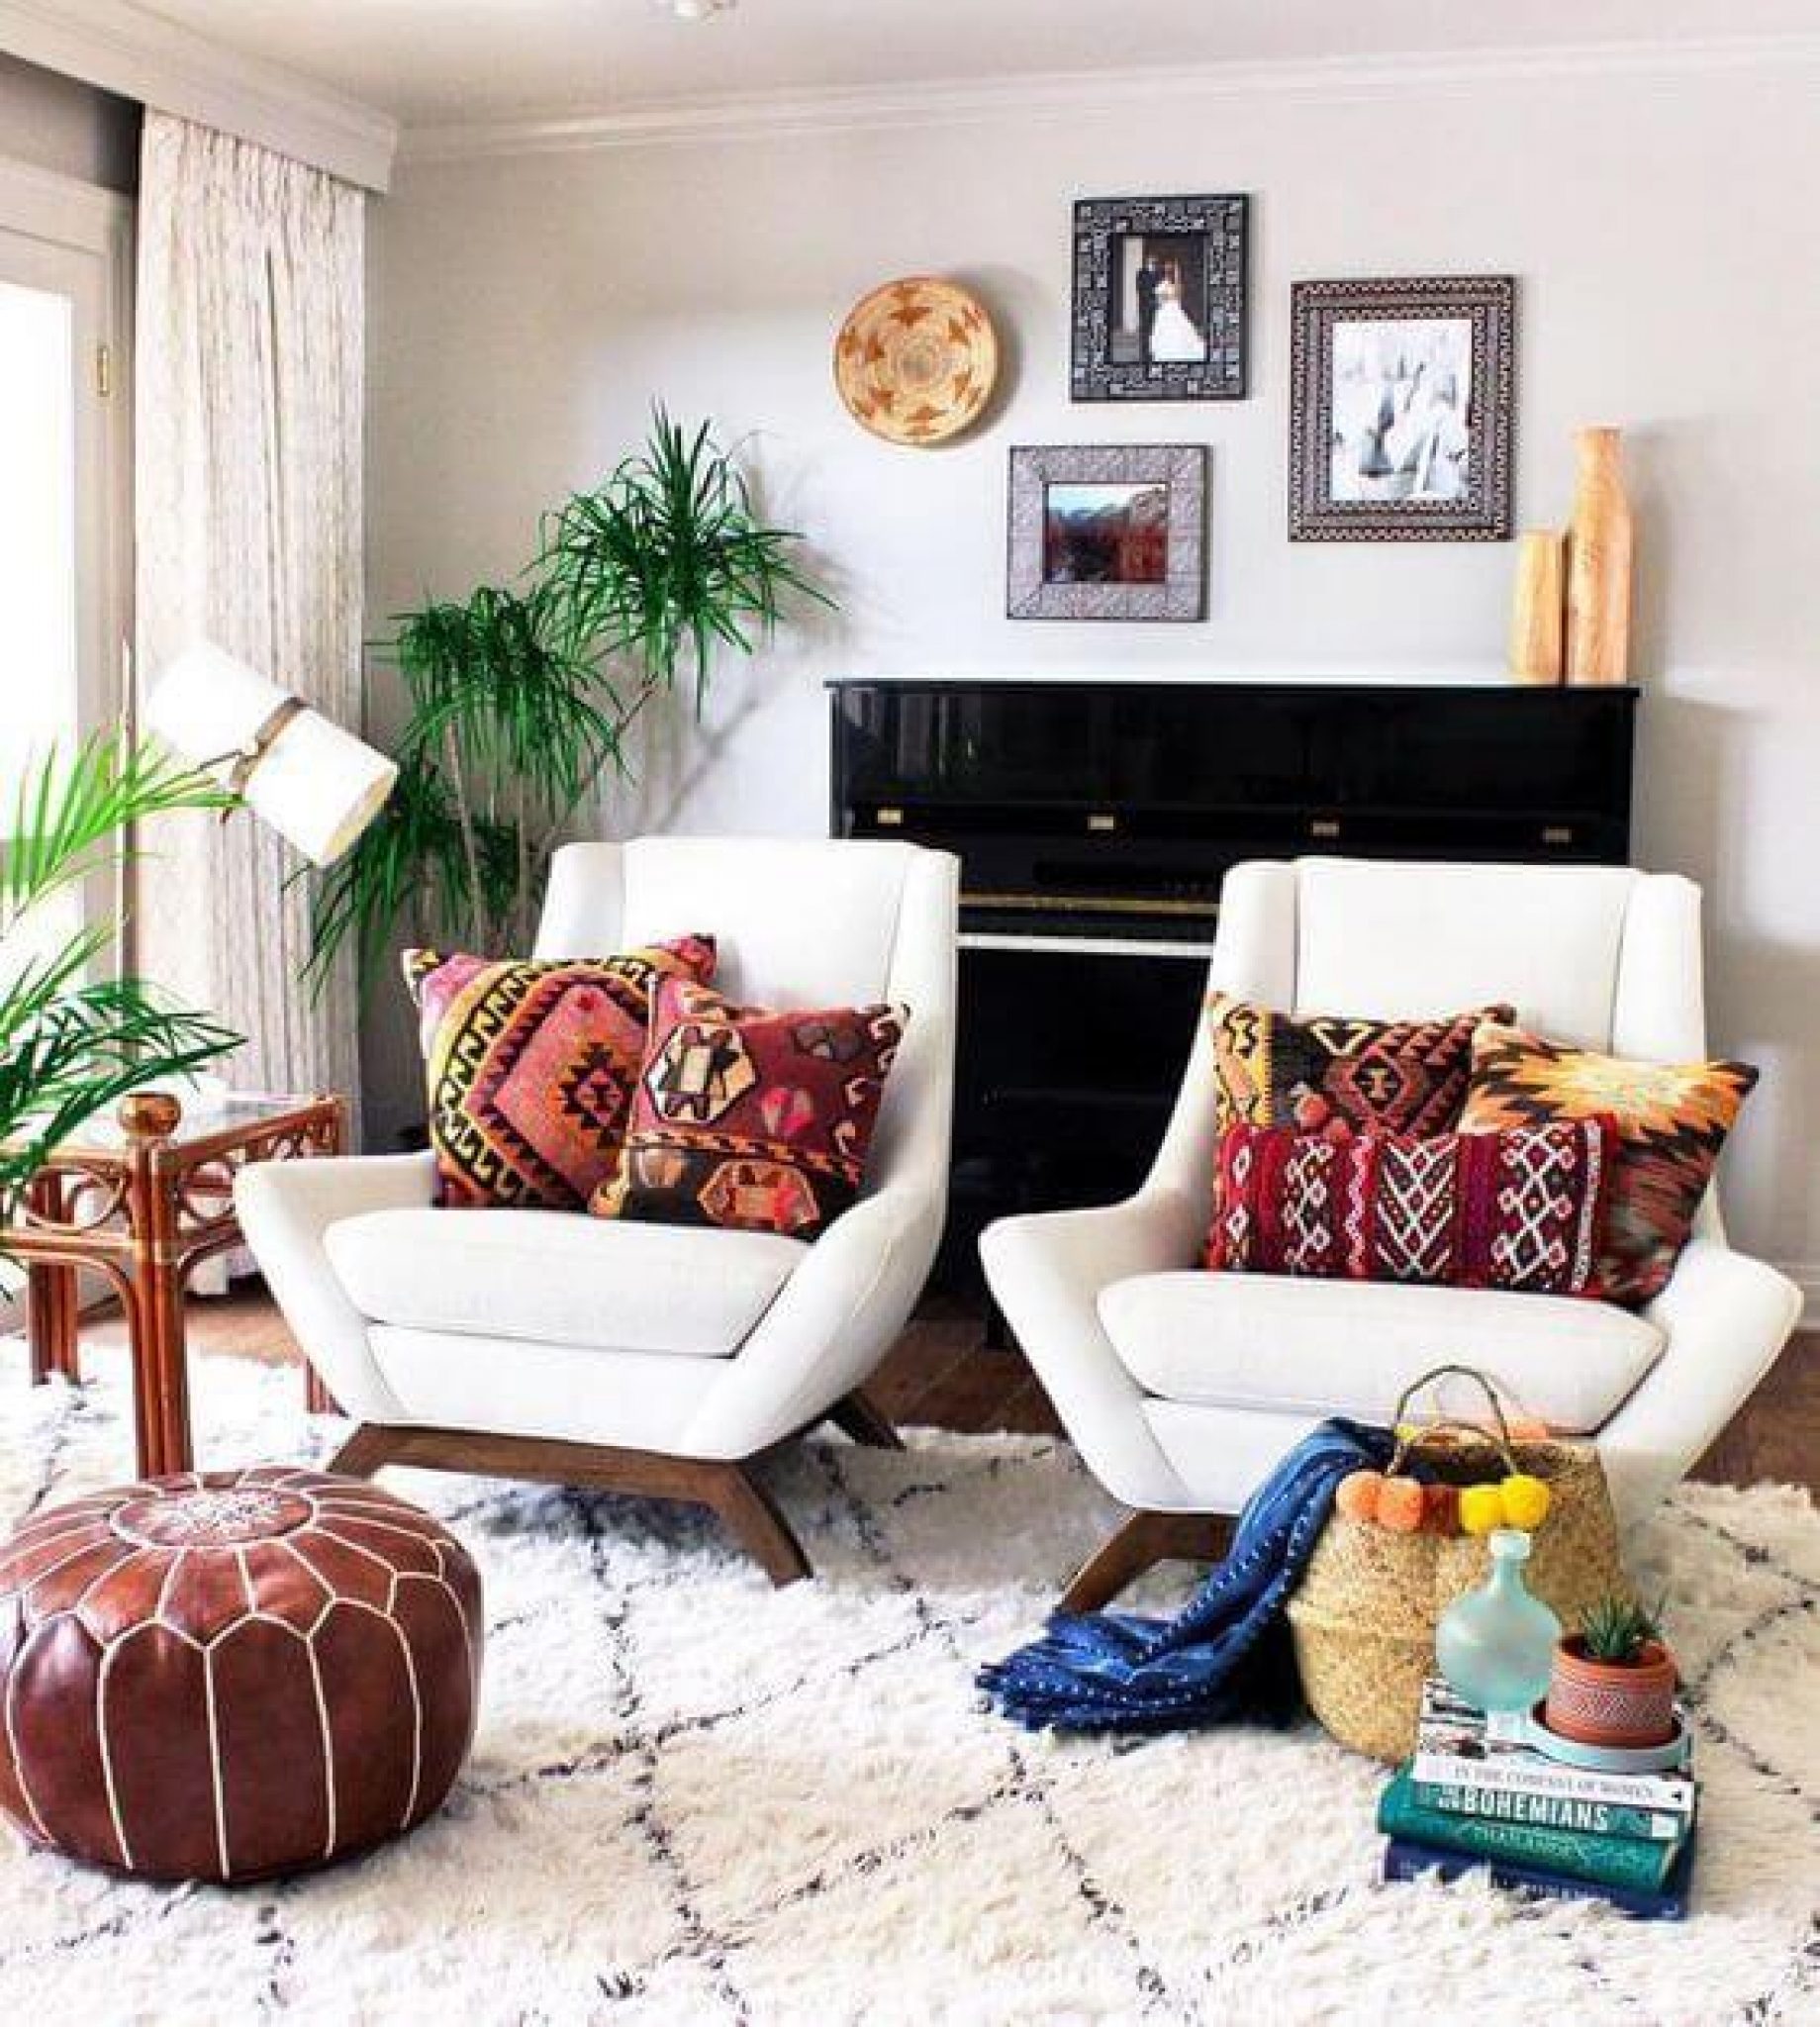 20 beautiful living room decor ideas for your home | Lifeingain